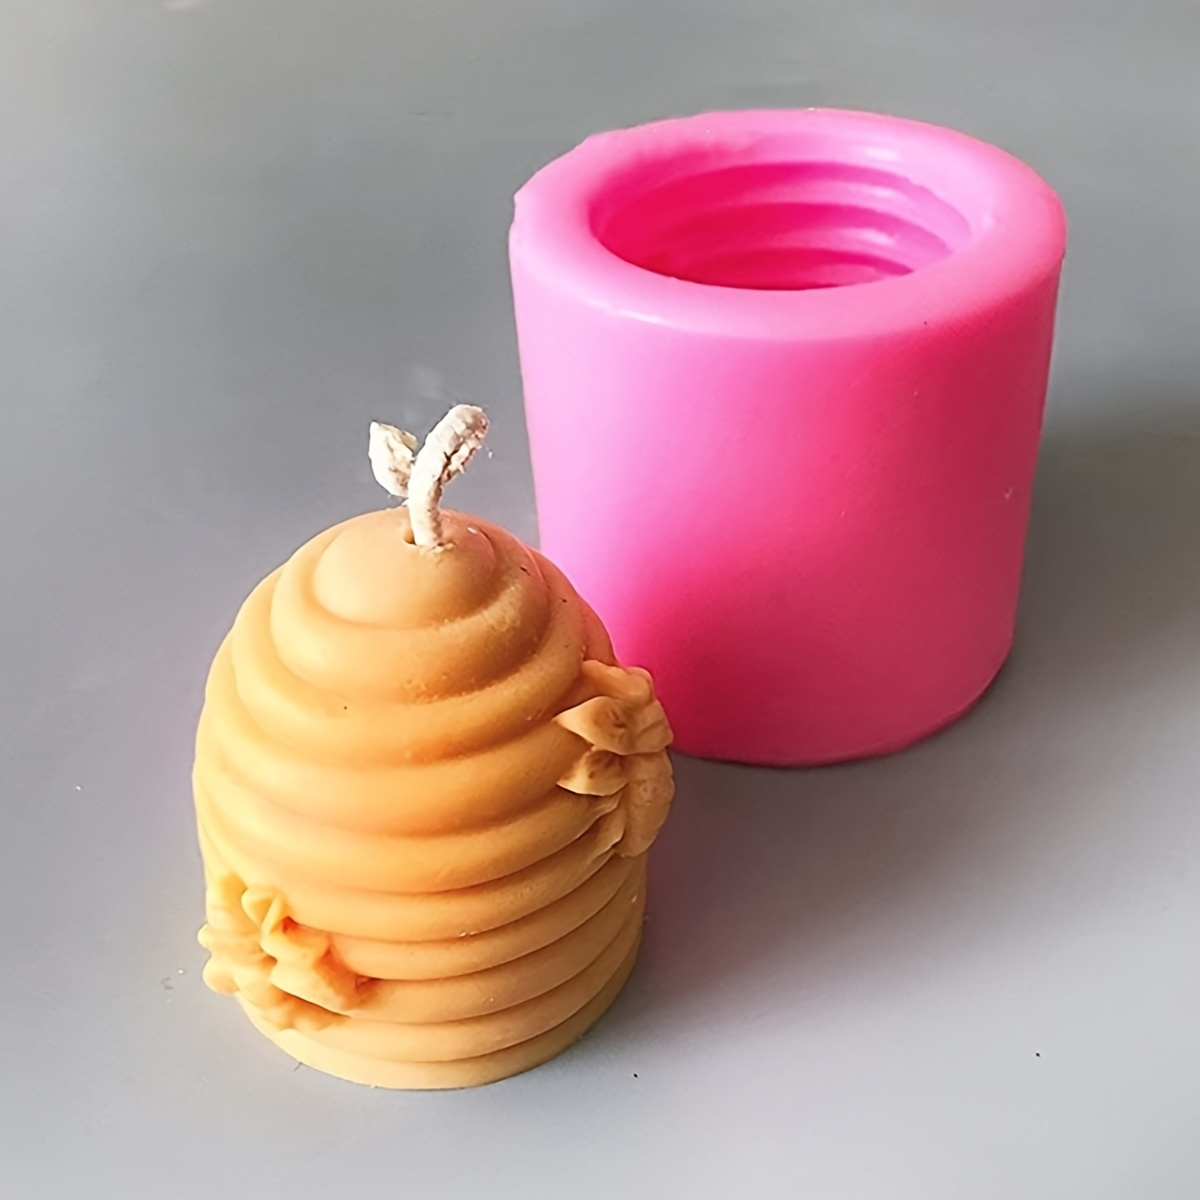 

1pc Bee-themed Silicone Candle Mold - Create Stunning Three-dimensional Beehive Designs - Perfect For Home Decor And Gift Giving